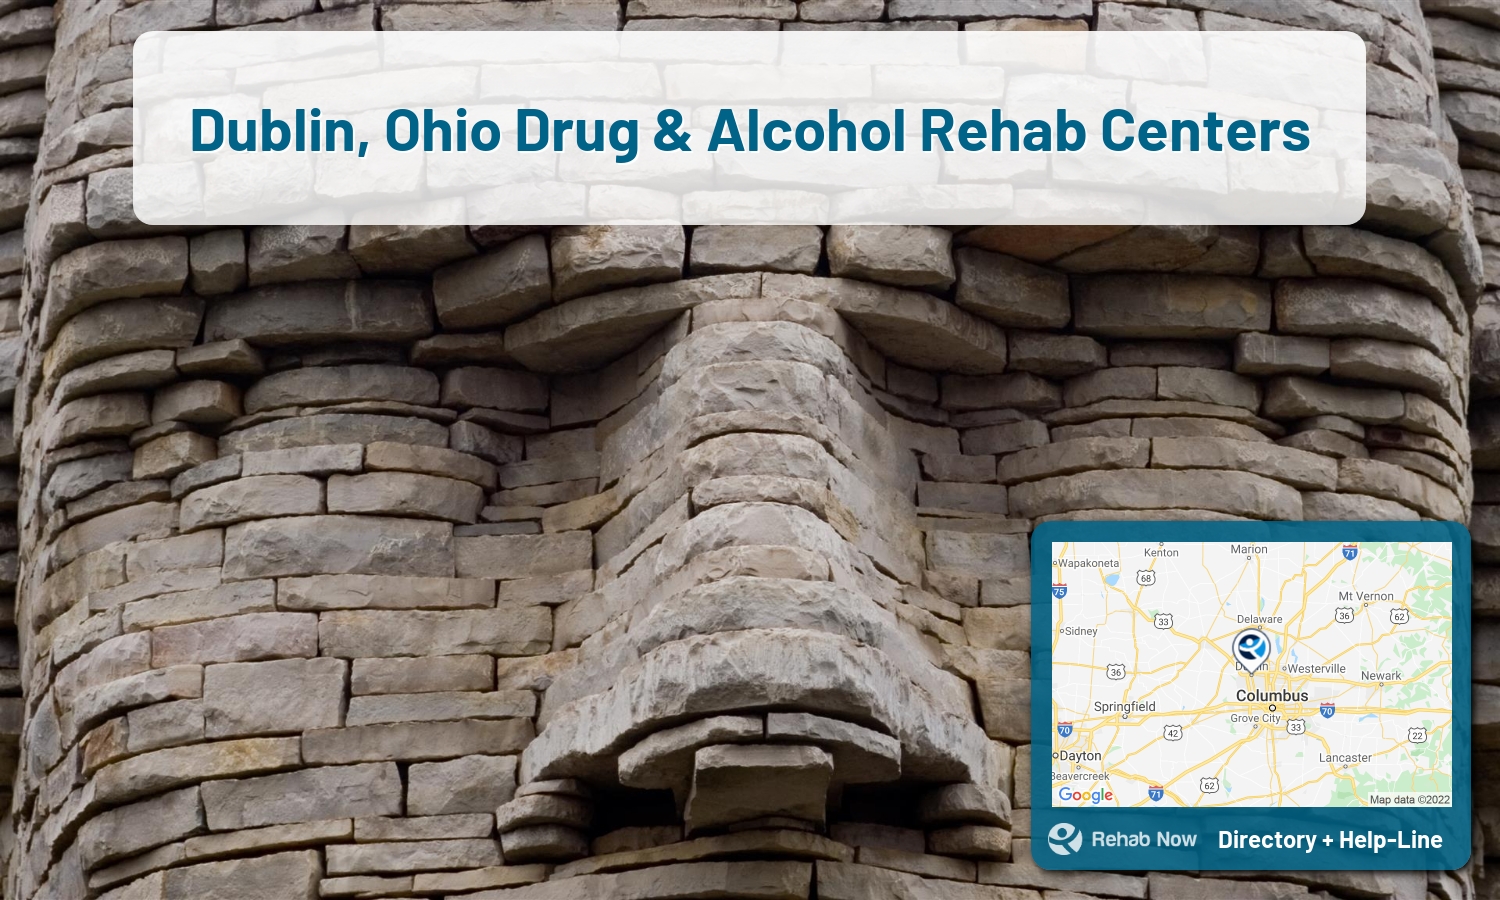 Dublin, OH Treatment Centers. Find drug rehab in Dublin, Ohio, or detox and treatment programs. Get the right help now!